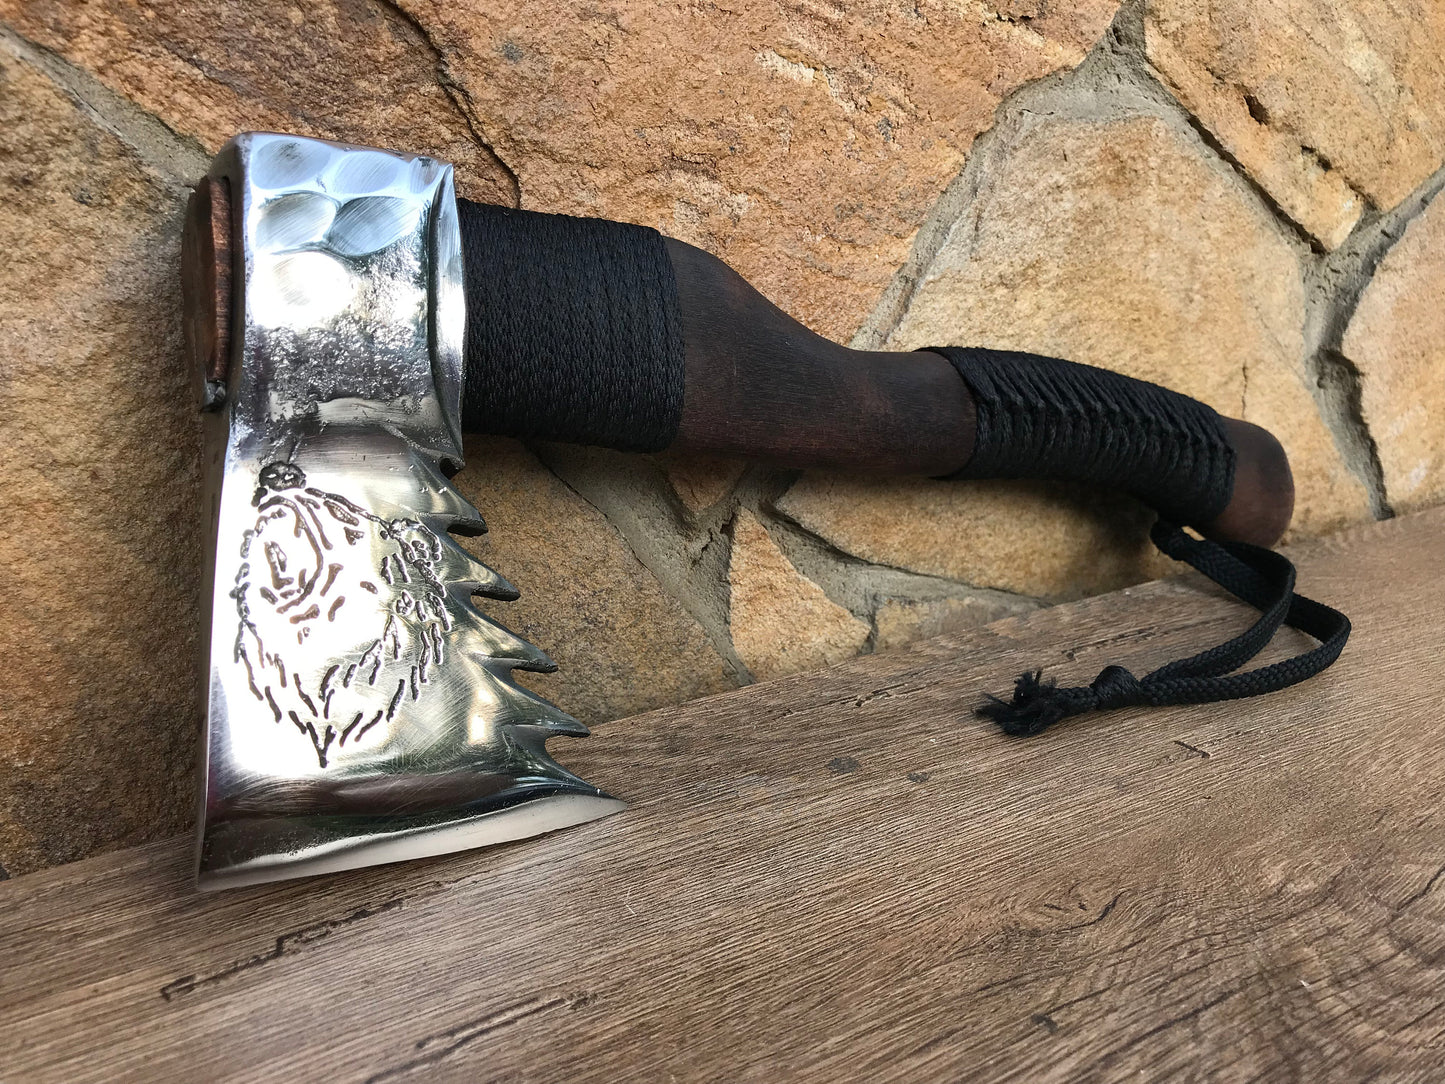 Viking axe, leather sheath, his birthday gift,mens anniversary gift, gift for dad, gift for men, Christmas gift, Fathers day gift, bear, axe